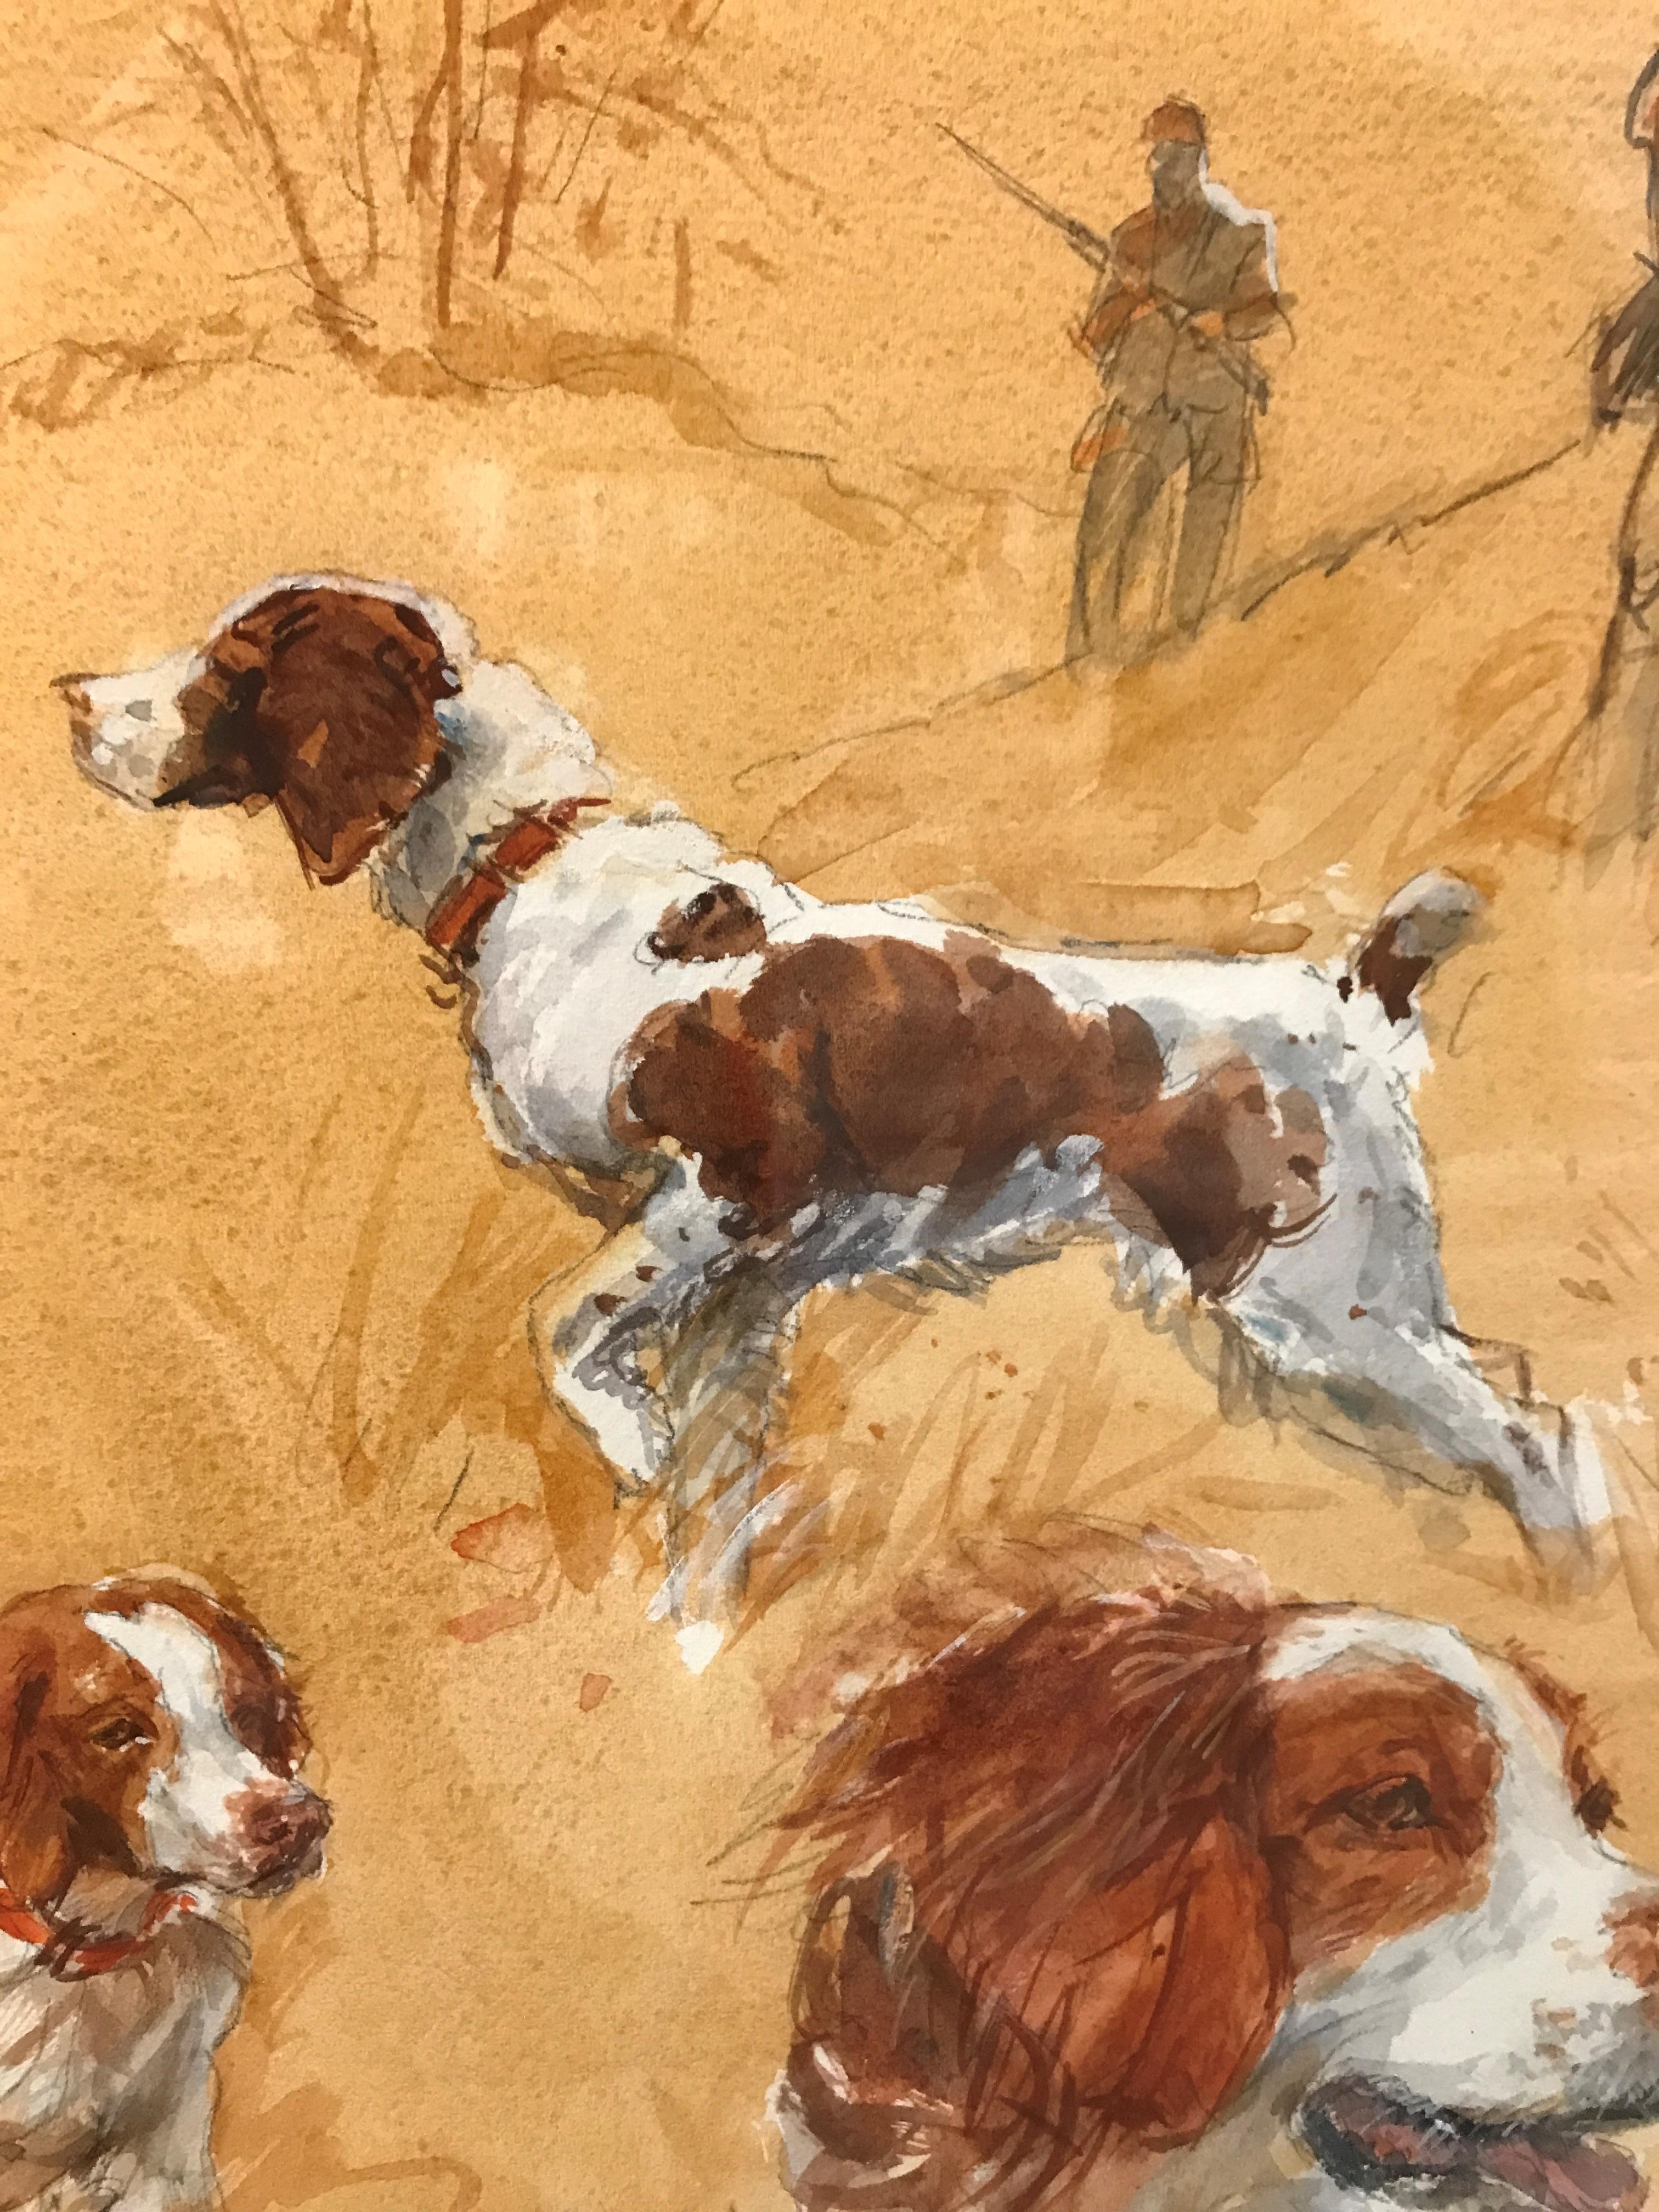 Contemporary Vignette of a Hunter and his Brittany Spaniel's Day in the Field - Painting by Sandra Oppegard